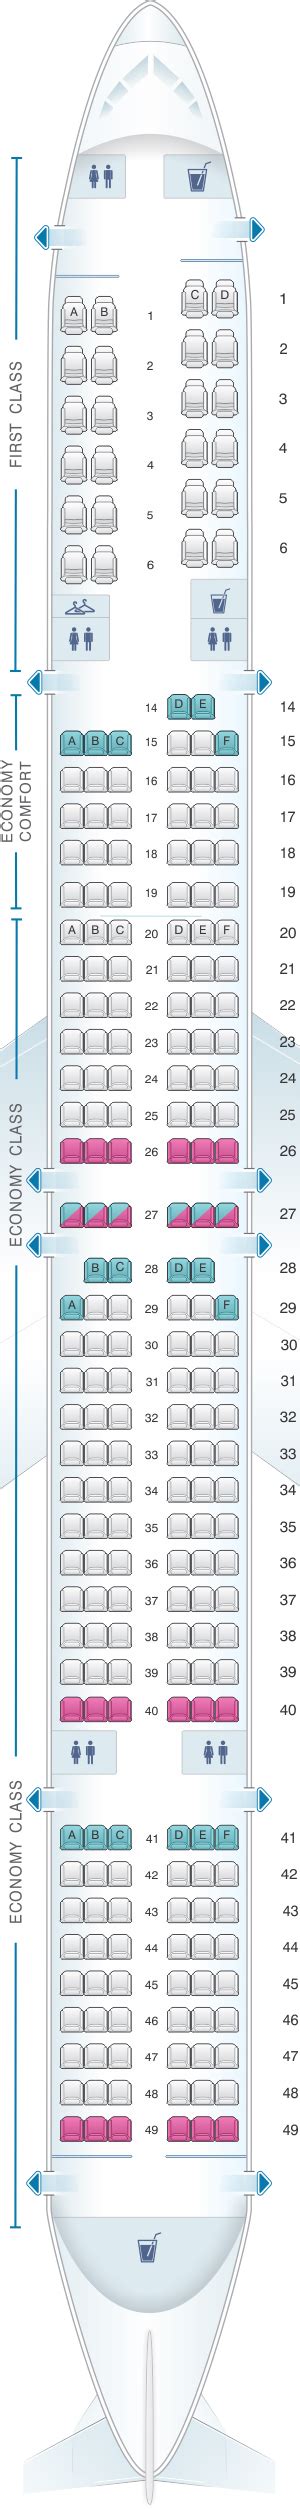 14 Delta Airlines Seating Chart 757